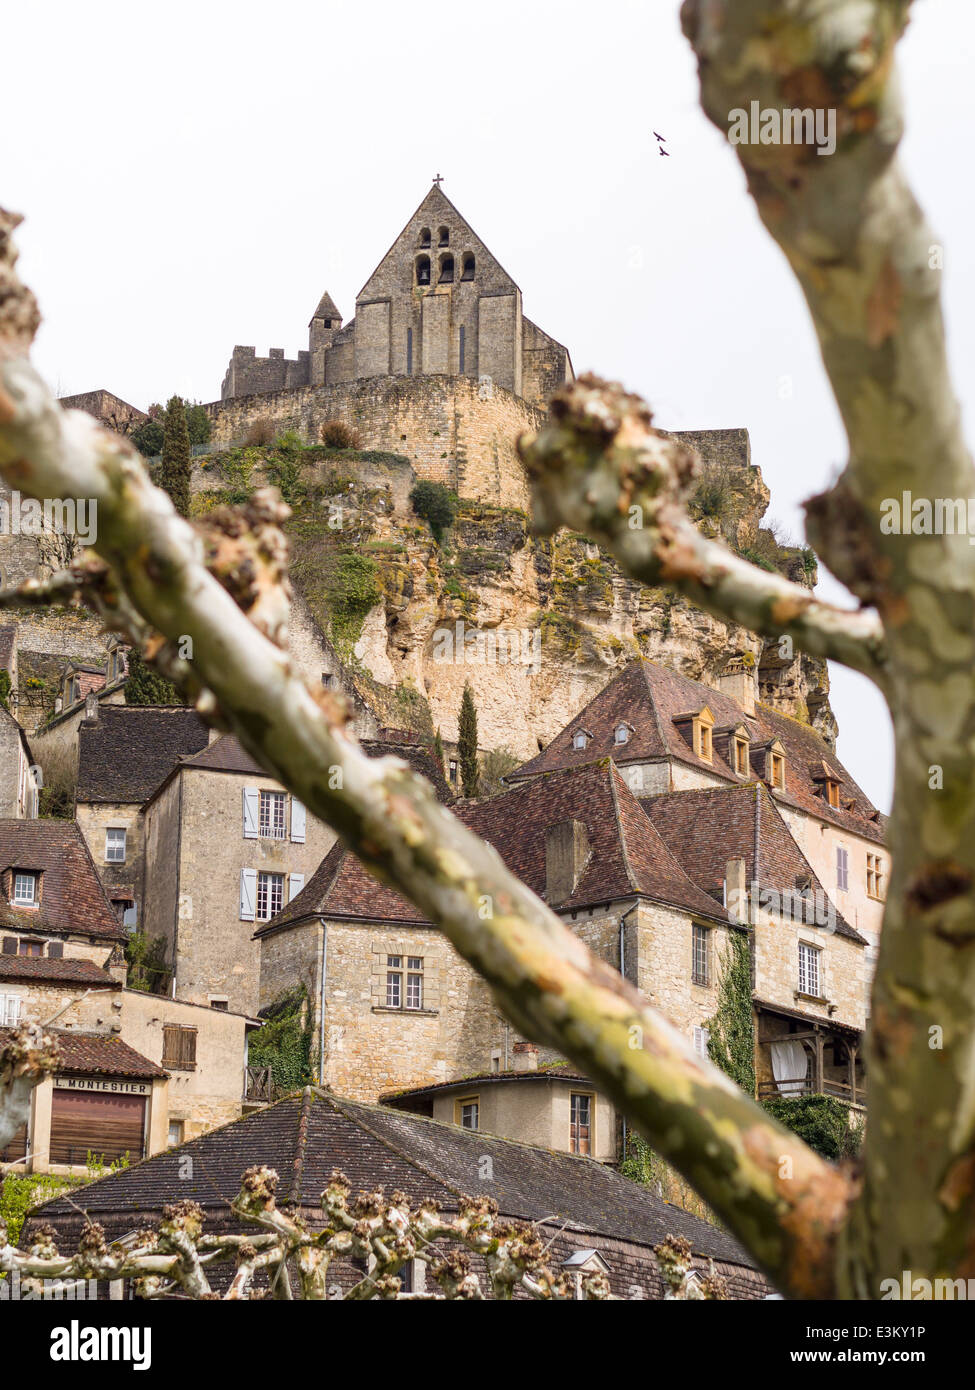 Romanesque Chapel above Beynac-et-Cazenac. Perched high above the village is this old Romanesque church. Stock Photo